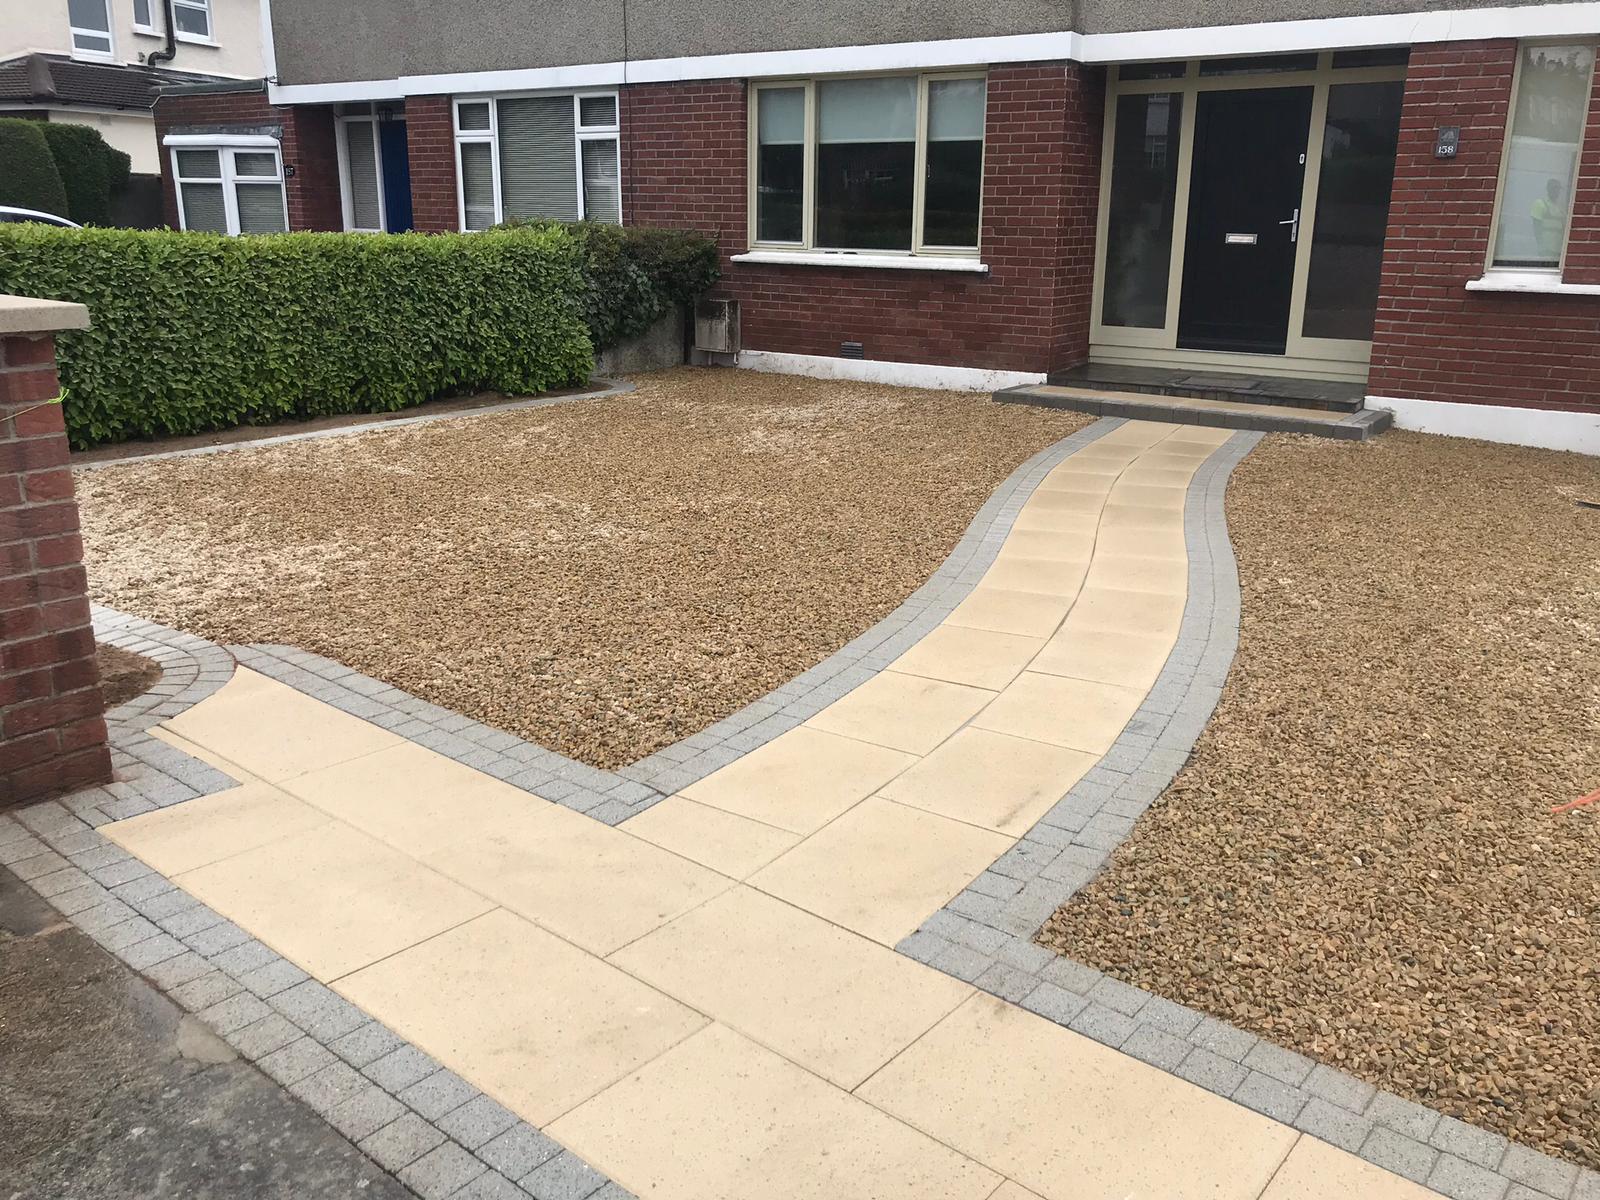 Paving in Dublin with contrasting paving border and gravel insert